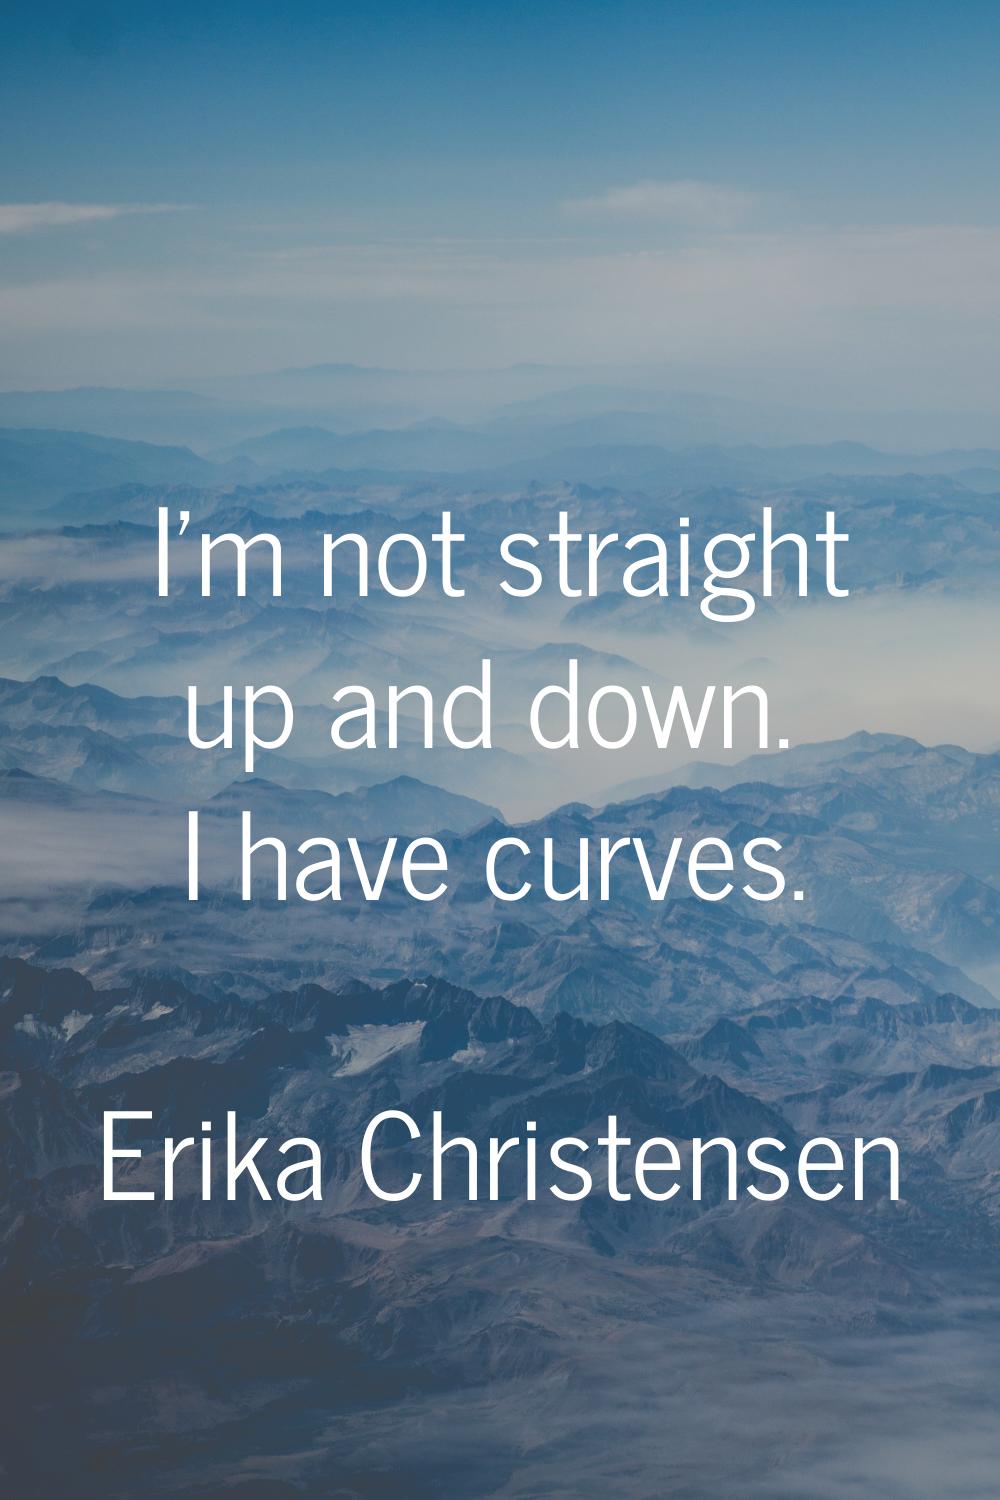 I'm not straight up and down. I have curves.